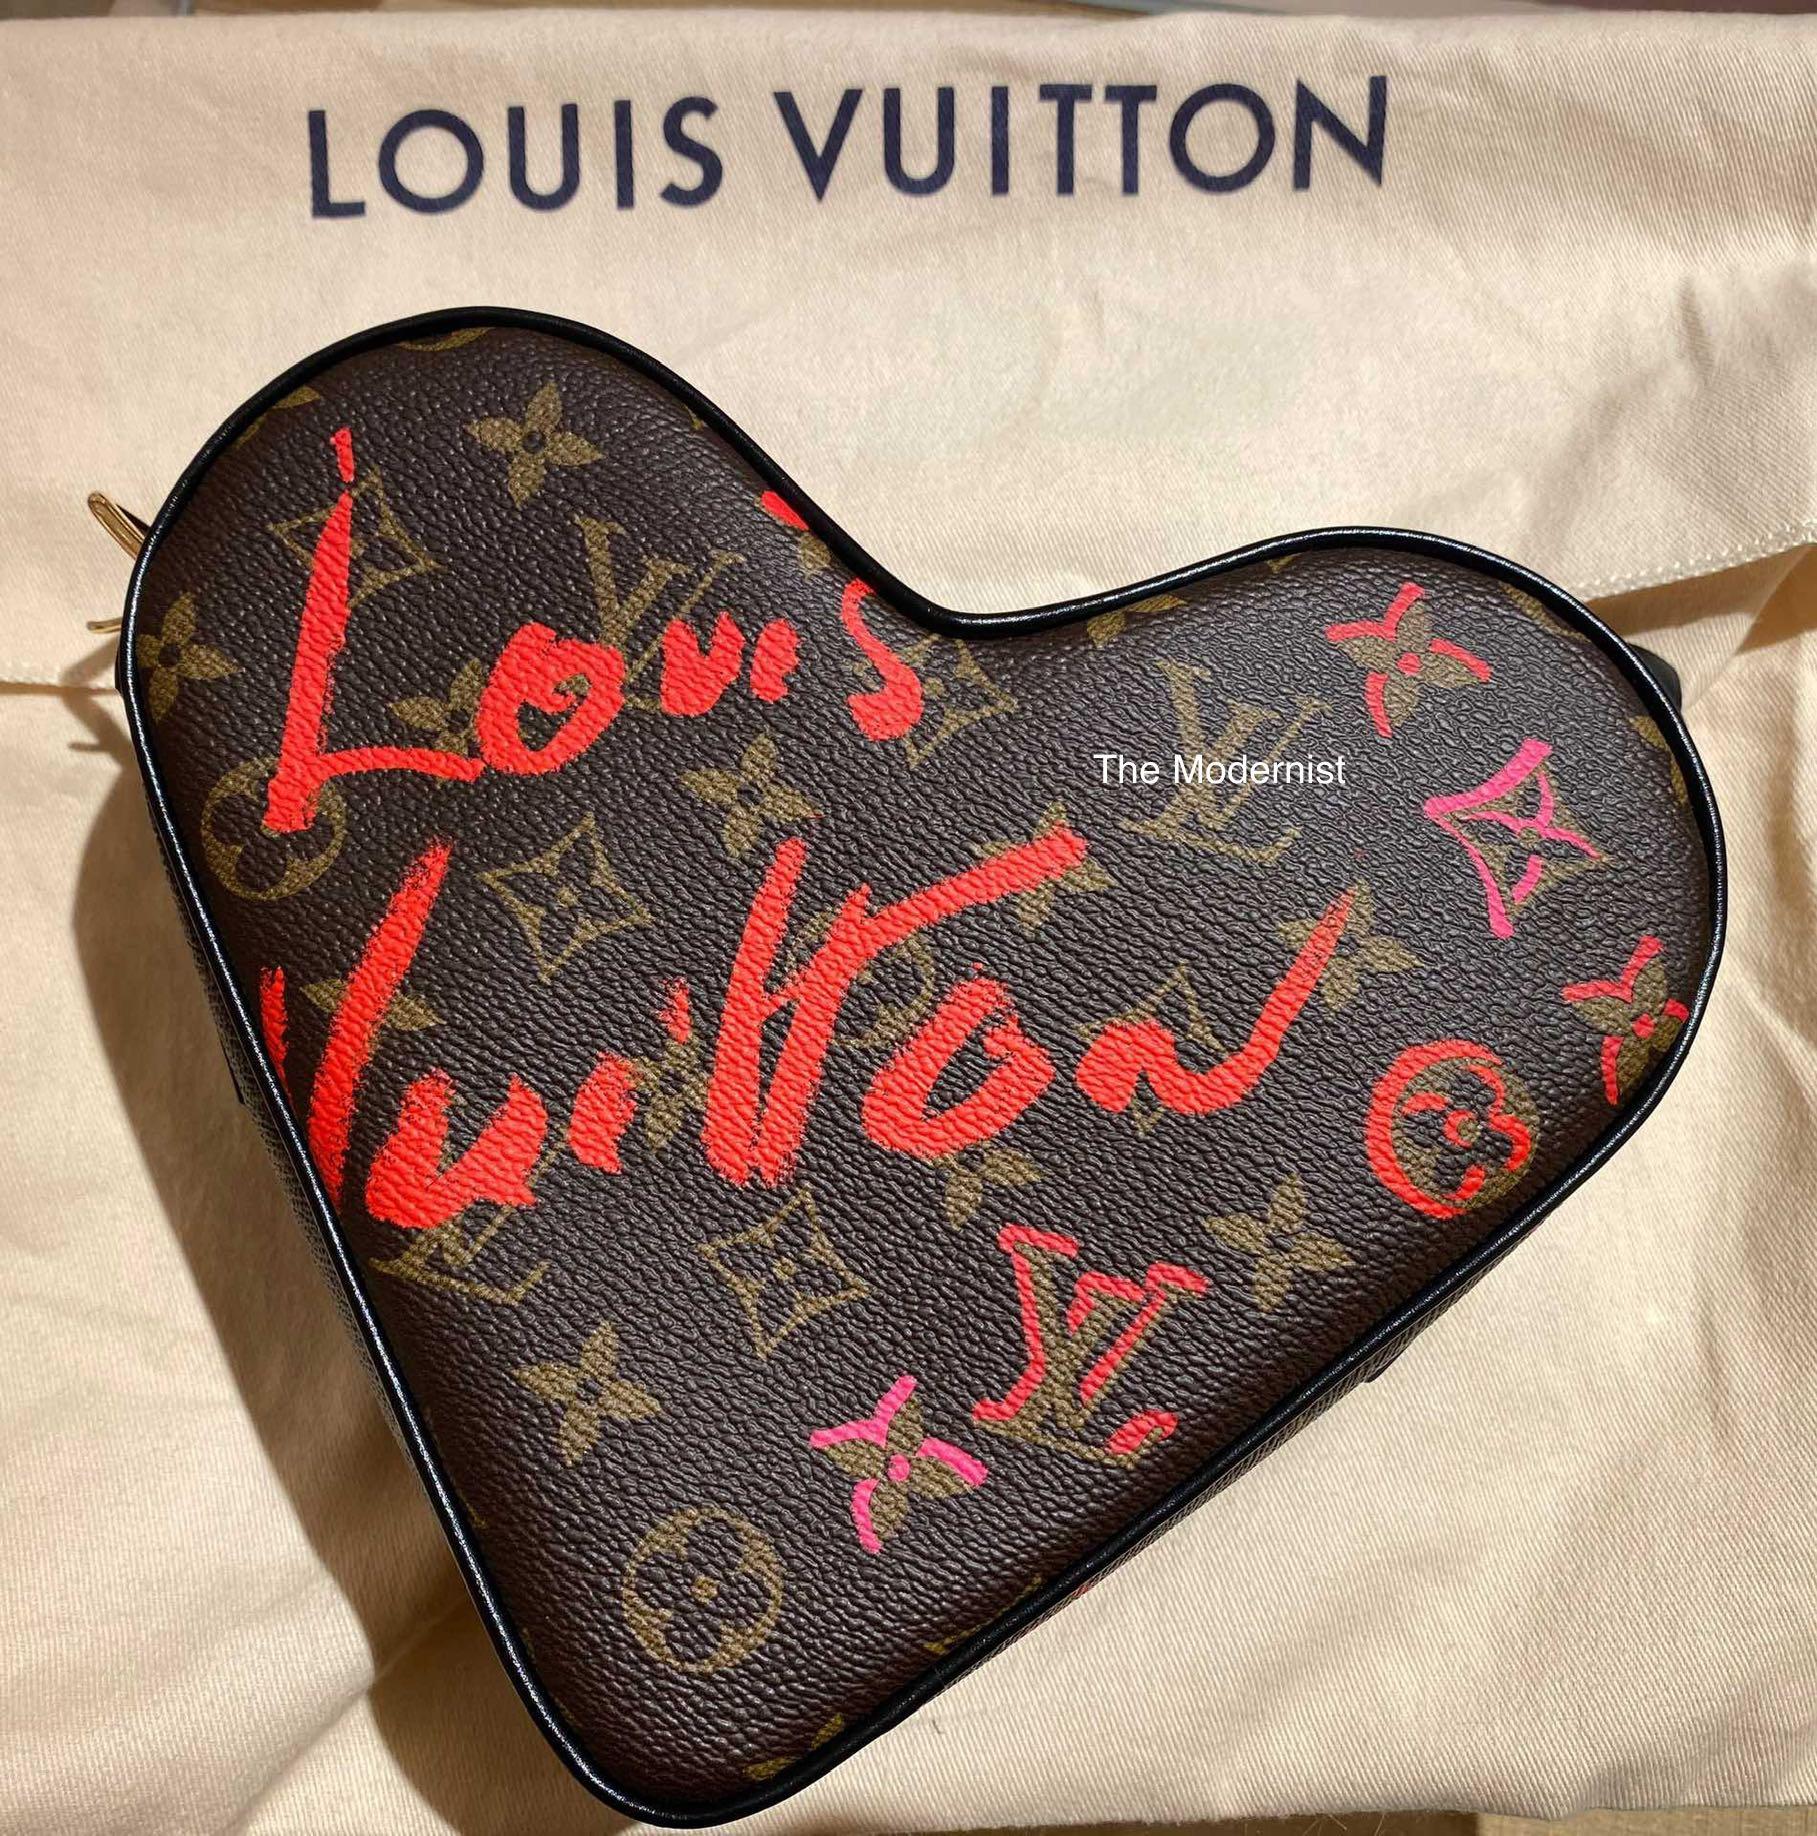 In Love with My New Louis Vuitton SC Bag!